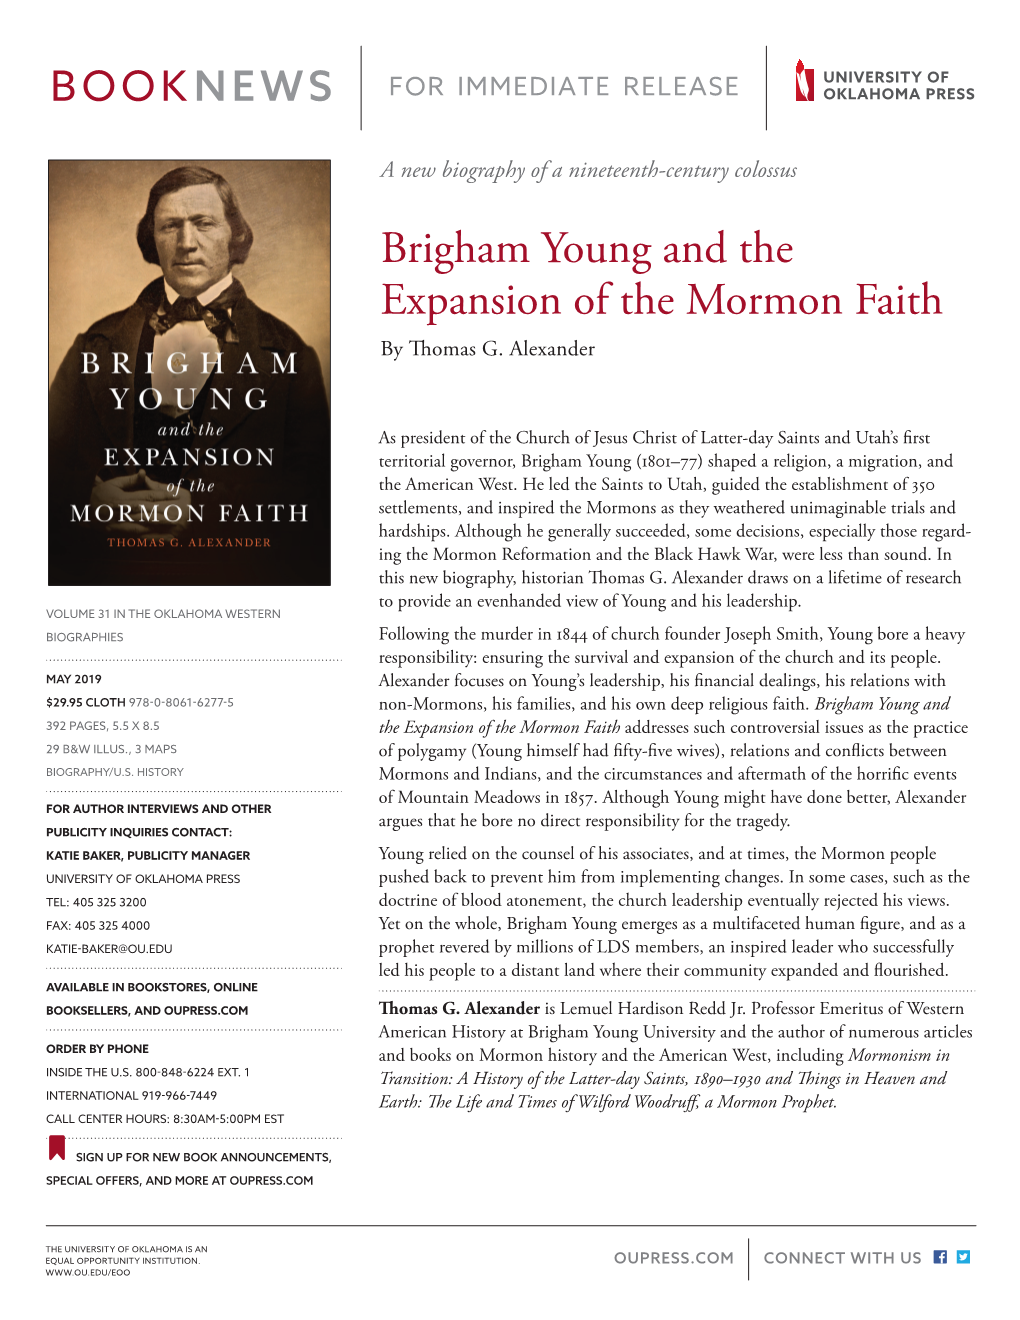 Brigham Young and the Expansion of the Mormon Faith by Thomas G